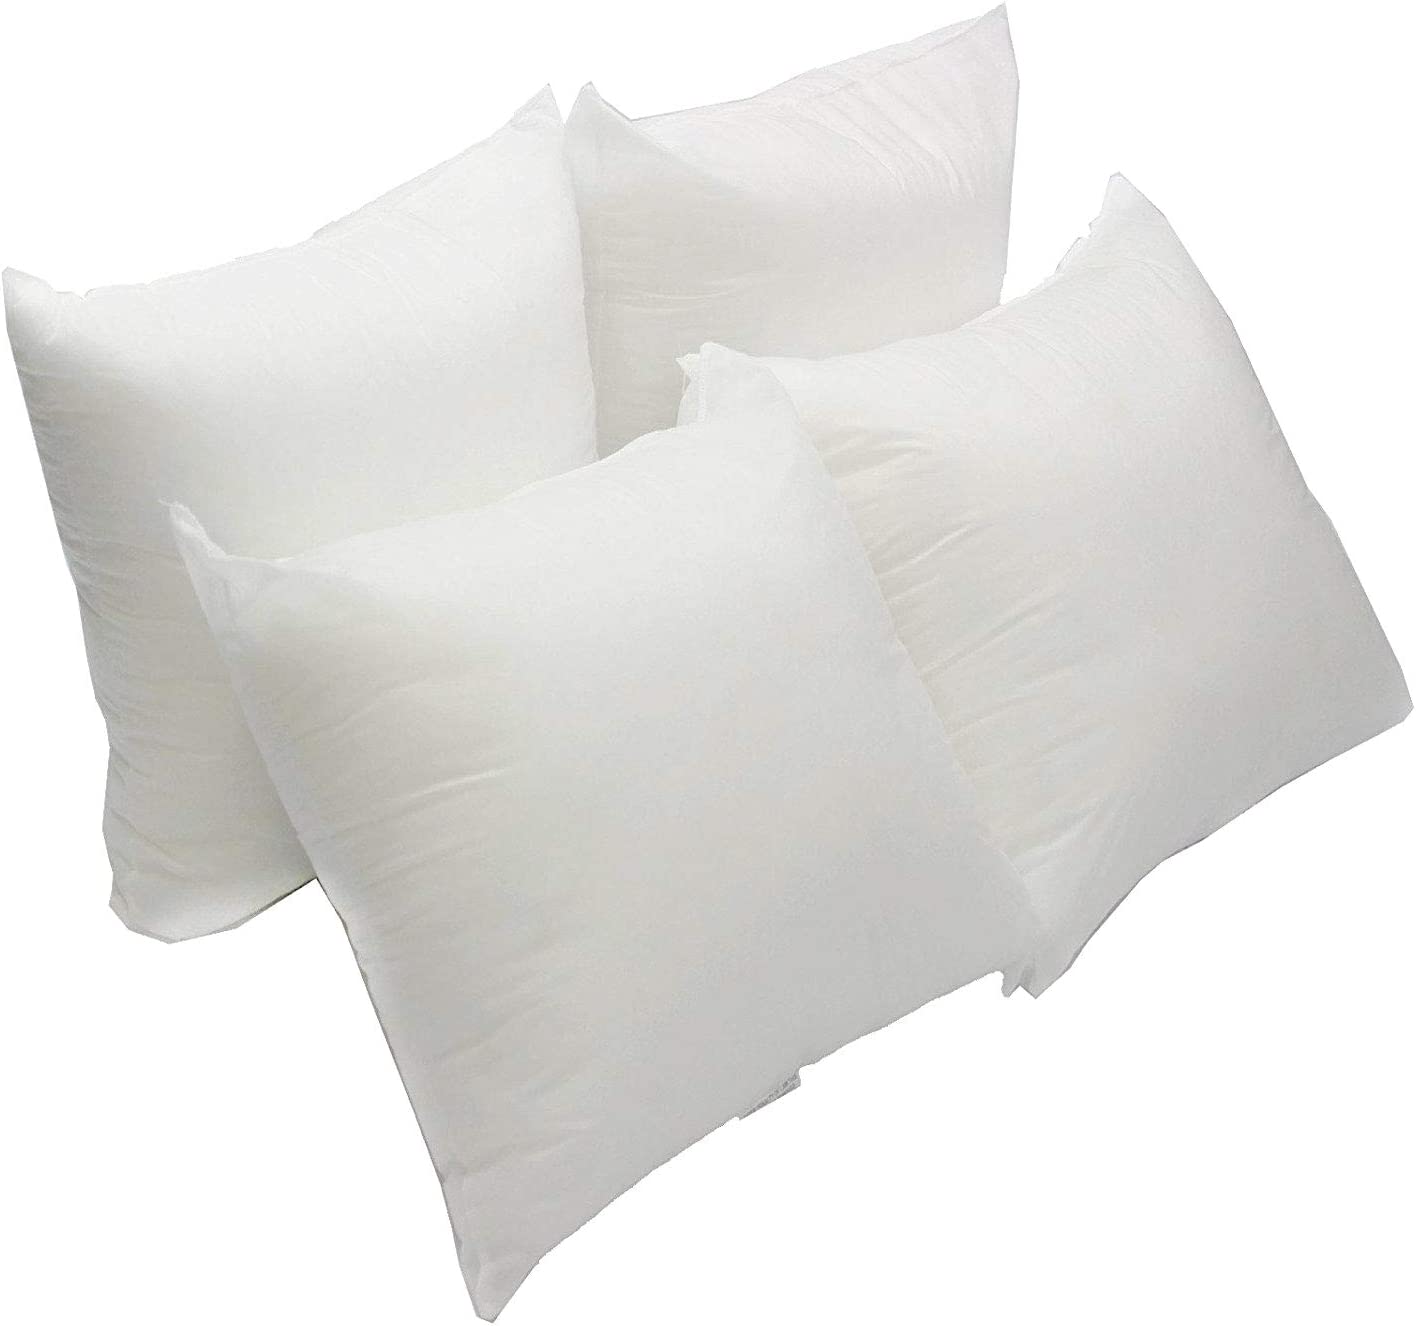 Pillow Insert Form Cushion,hypoallergenic Square Throw Pillow